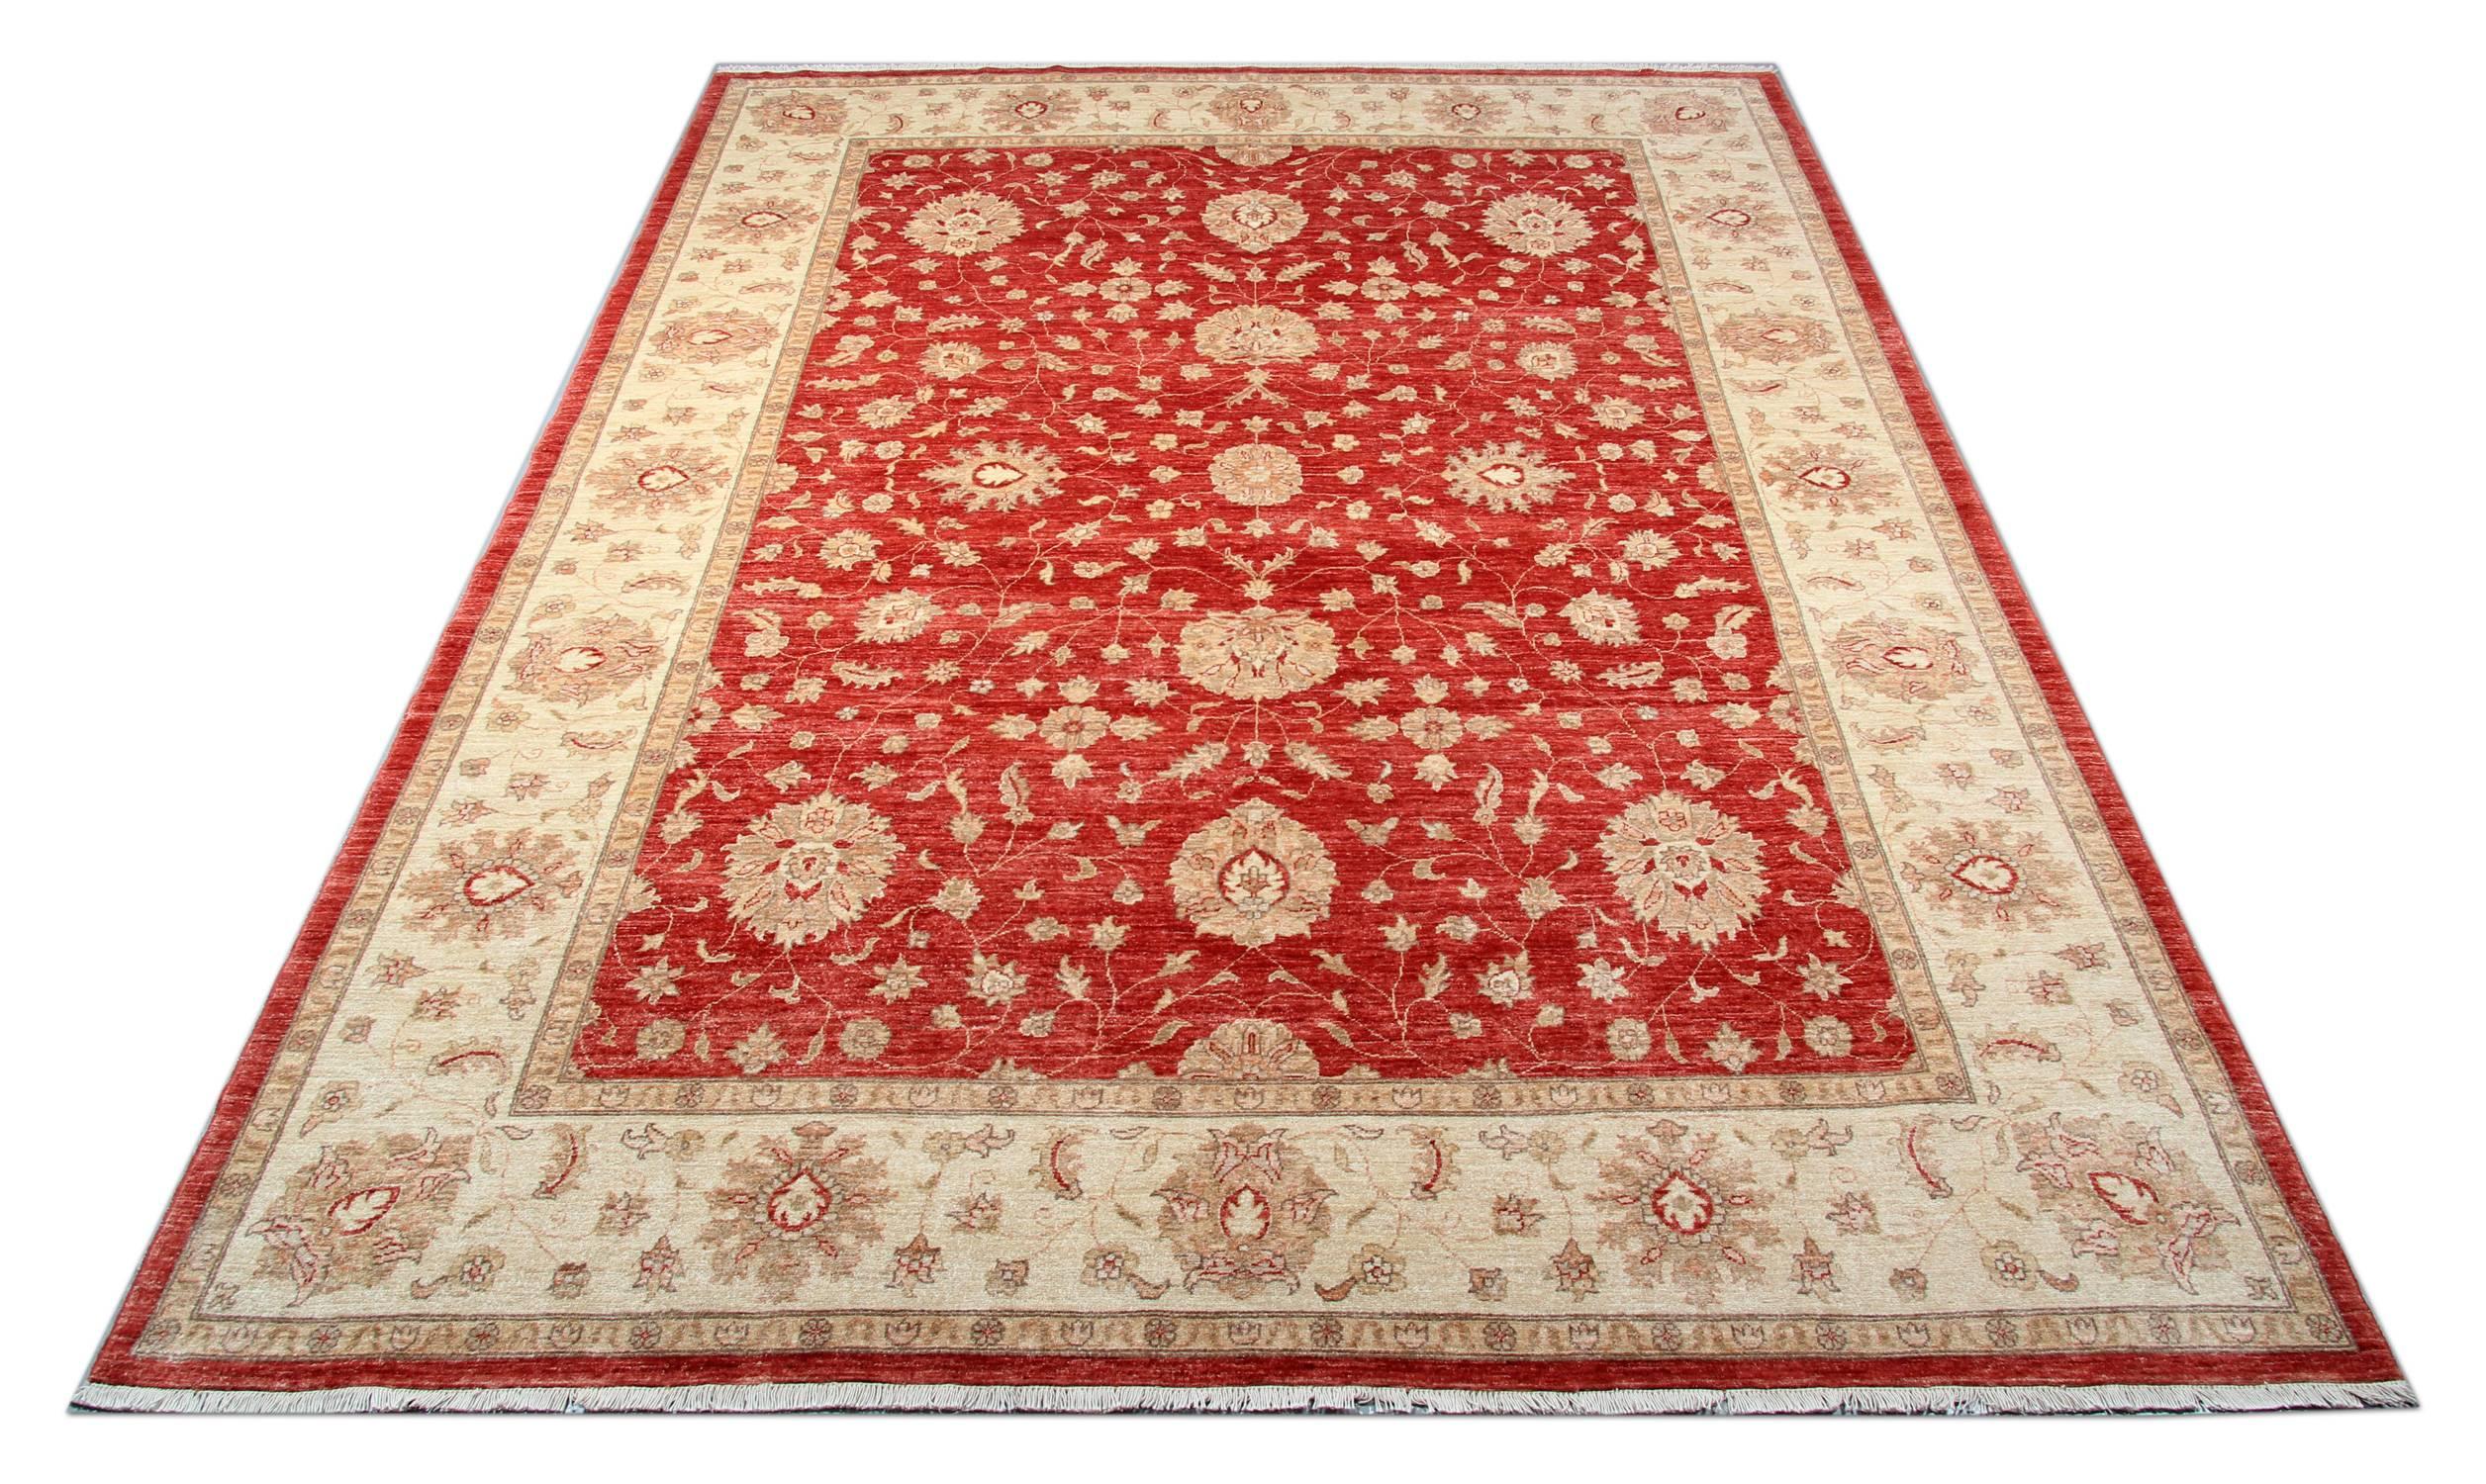 This oriental rug is a Ziegler Sultanabad rug made on our looms by our master weavers in Afghanistan. It is a handmade carpet with all-natural veg dyes all hand-spun wool. The large-scale design makes Sultanabad regarded as the most appealing to